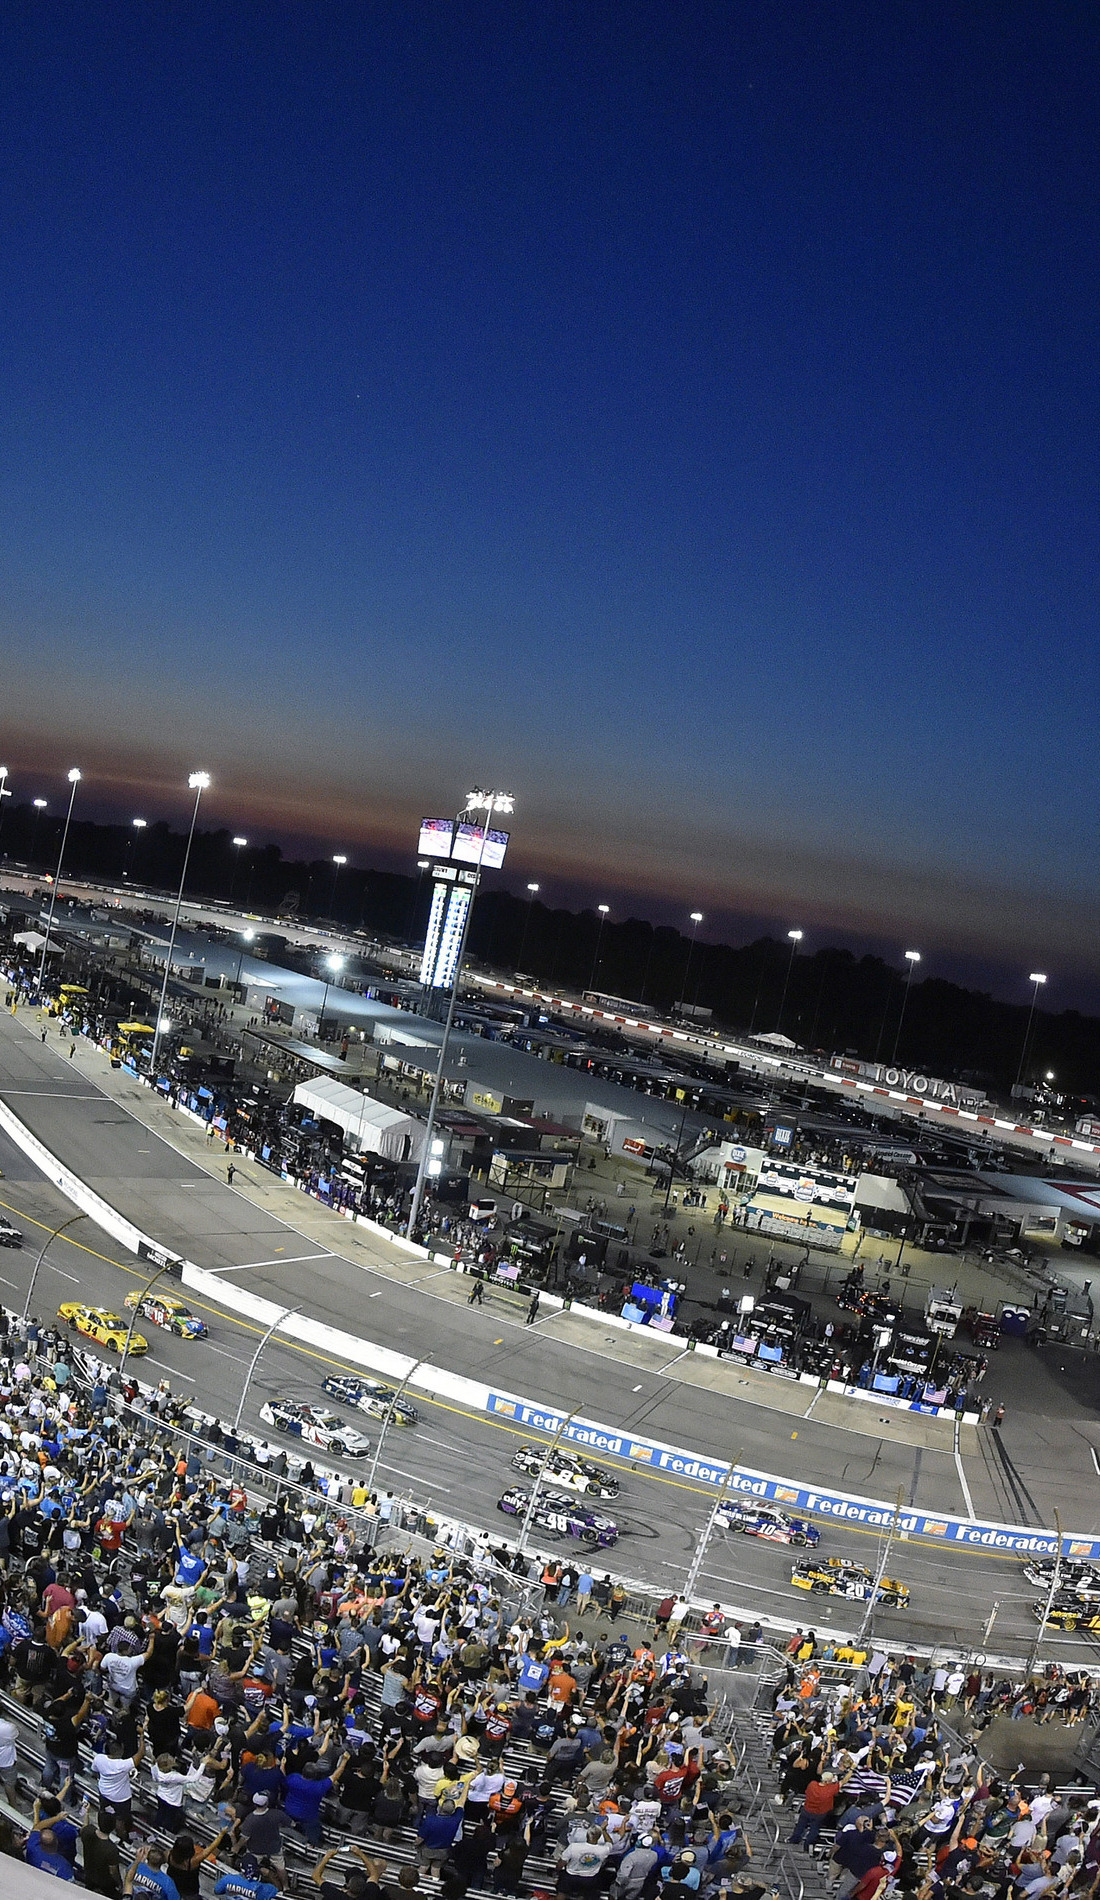 A Federated Auto Parts 400 live event